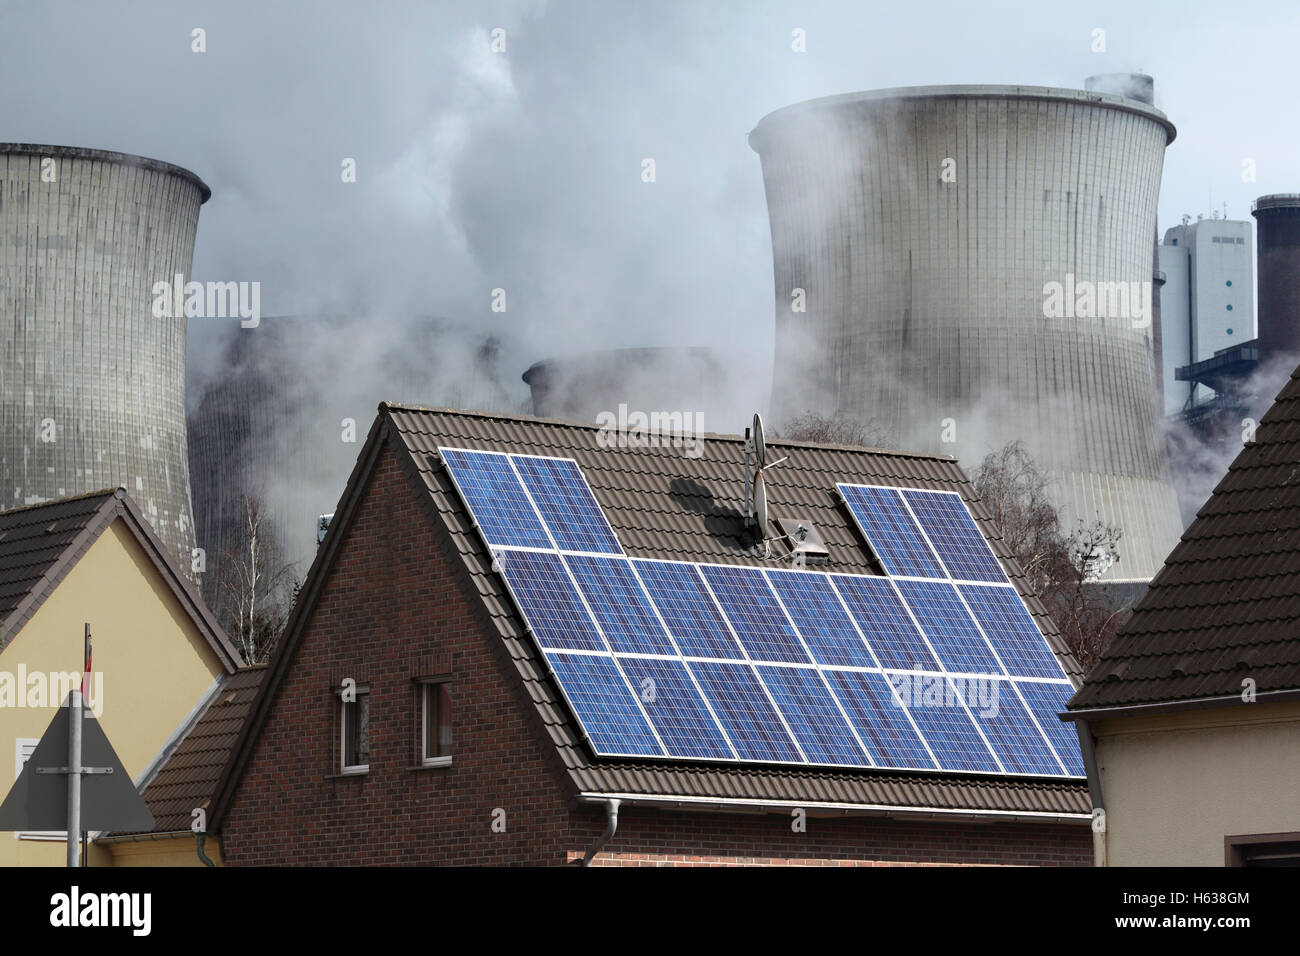 Contrasting sources of energy: a solar electric (pv) generating system on a house roof next to a coal power station, Germany Stock Photo